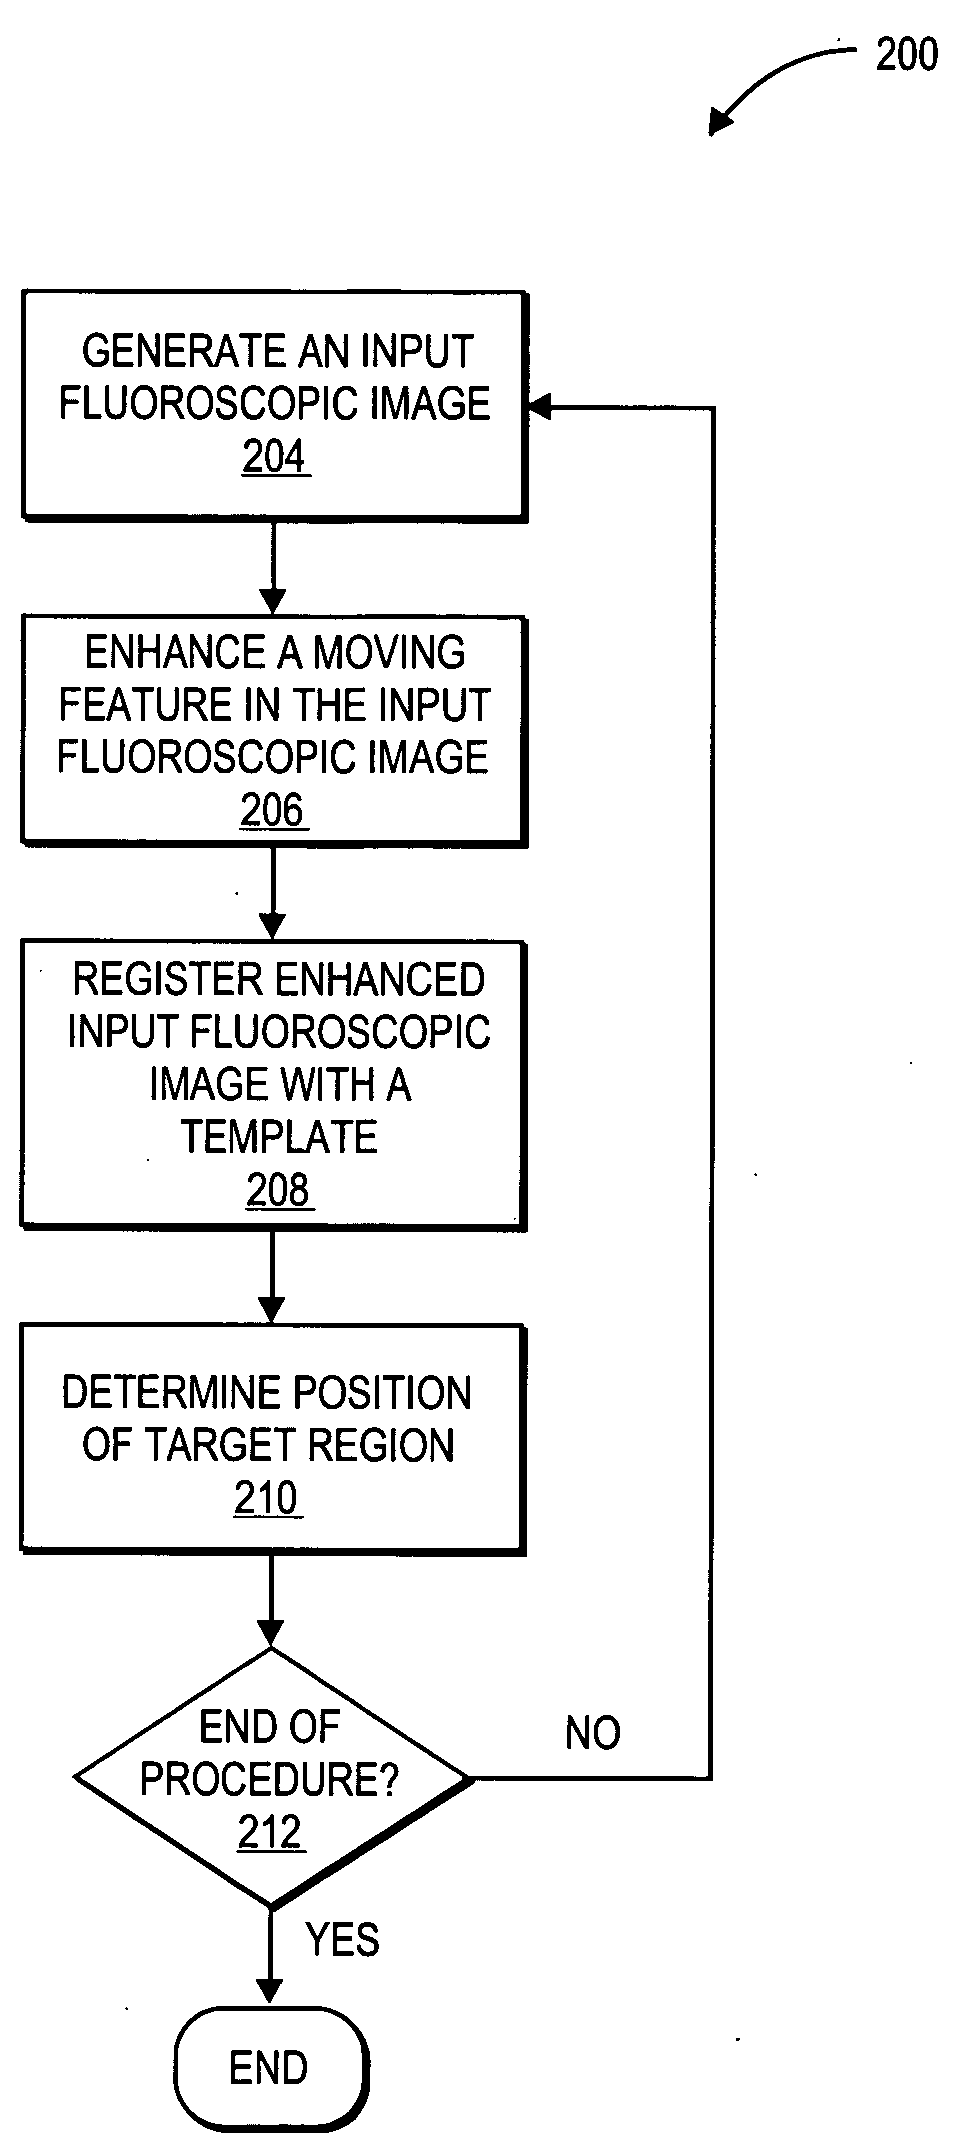 Systems and methods for tracking moving targets and monitoring object positions